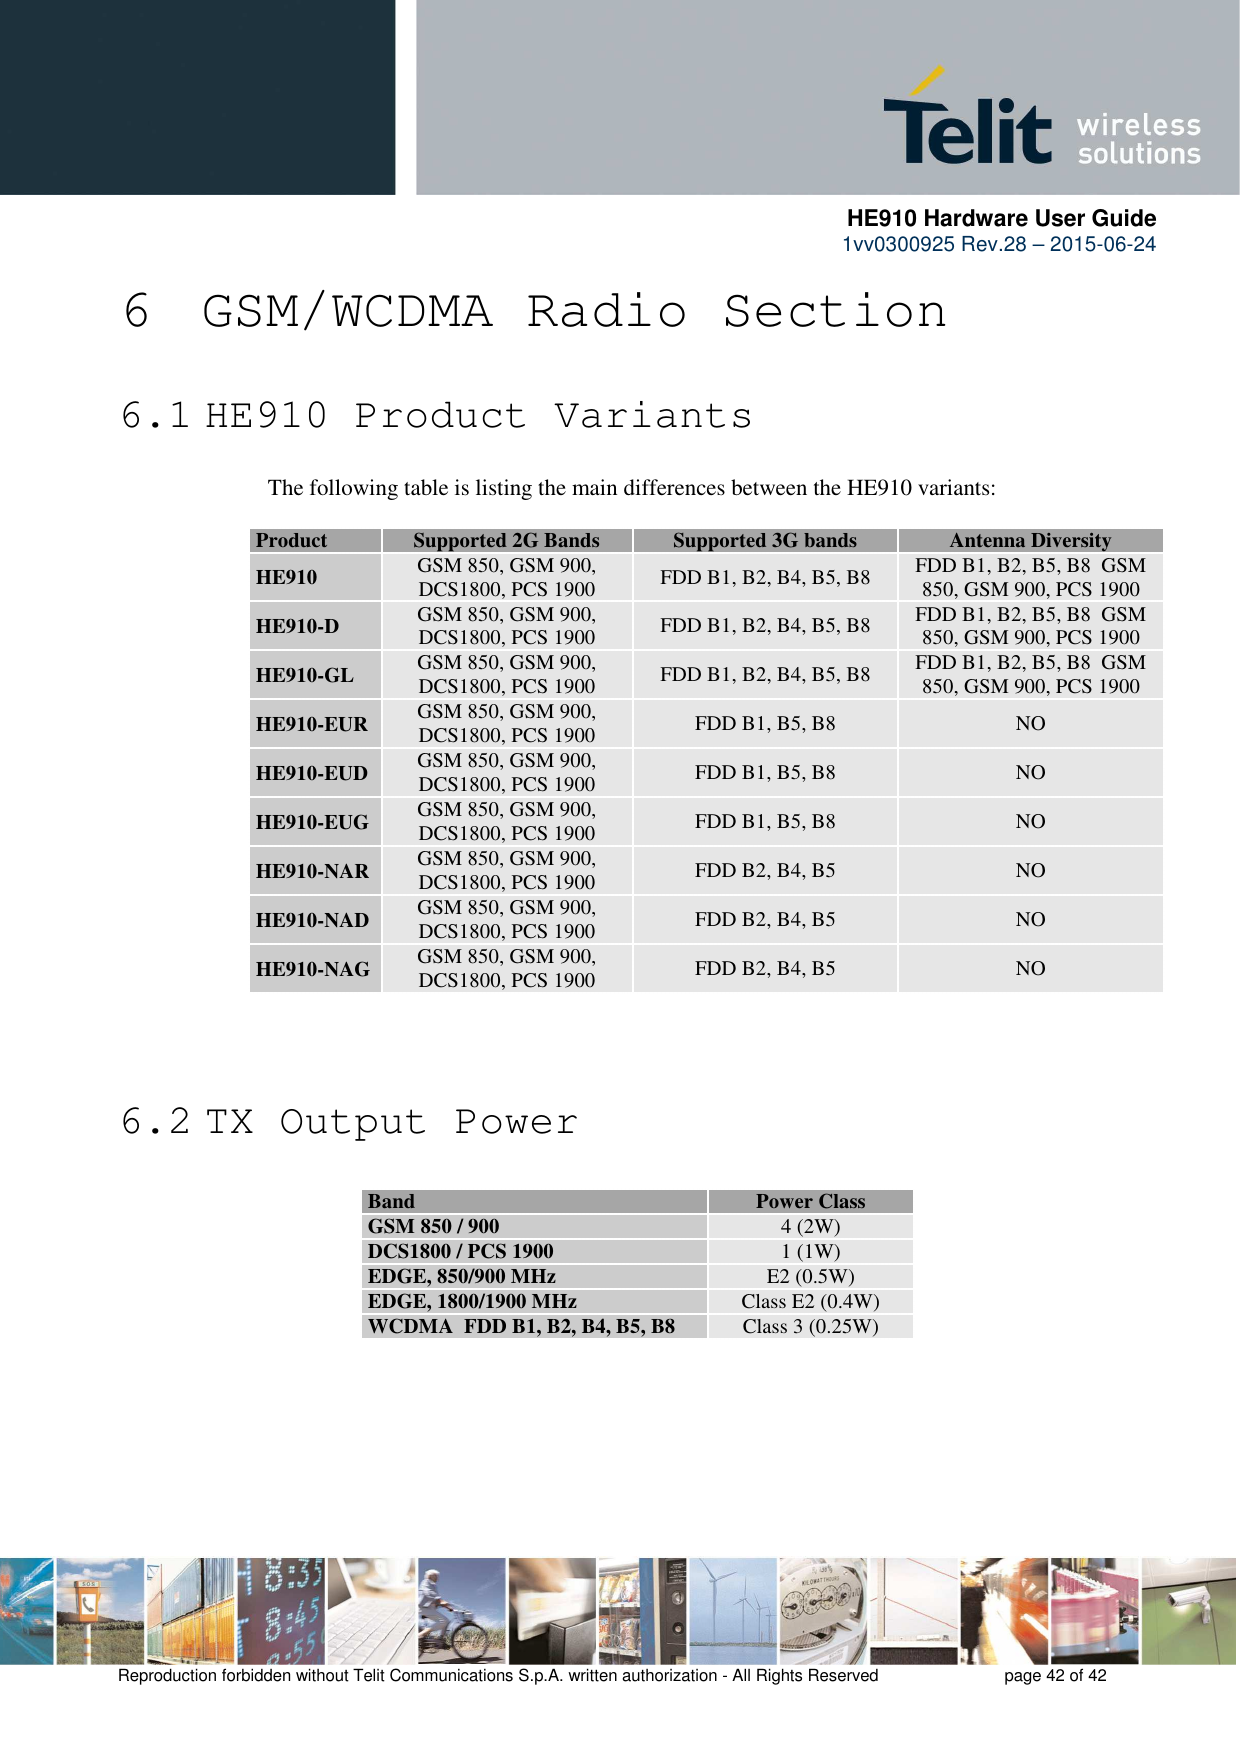      HE910 Hardware User Guide 1vv0300925 Rev.28 – 2015-06-24    Reproduction forbidden without Telit Communications S.p.A. written authorization - All Rights Reserved    page 42 of 42  6 GSM/WCDMA Radio Section 6.1 HE910 Product Variants The following table is listing the main differences between the HE910 variants:  Product  Supported 2G Bands Supported 3G bands Antenna Diversity HE910  GSM 850, GSM 900, DCS1800, PCS 1900  FDD B1, B2, B4, B5, B8  FDD B1, B2, B5, B8  GSM 850, GSM 900, PCS 1900 HE910-D  GSM 850, GSM 900, DCS1800, PCS 1900  FDD B1, B2, B4, B5, B8  FDD B1, B2, B5, B8  GSM 850, GSM 900, PCS 1900 HE910-GL  GSM 850, GSM 900, DCS1800, PCS 1900  FDD B1, B2, B4, B5, B8  FDD B1, B2, B5, B8  GSM 850, GSM 900, PCS 1900 HE910-EUR  GSM 850, GSM 900, DCS1800, PCS 1900  FDD B1, B5, B8  NO HE910-EUD  GSM 850, GSM 900, DCS1800, PCS 1900  FDD B1, B5, B8  NO HE910-EUG  GSM 850, GSM 900, DCS1800, PCS 1900  FDD B1, B5, B8  NO HE910-NAR  GSM 850, GSM 900, DCS1800, PCS 1900  FDD B2, B4, B5  NO HE910-NAD  GSM 850, GSM 900, DCS1800, PCS 1900  FDD B2, B4, B5  NO HE910-NAG  GSM 850, GSM 900, DCS1800, PCS 1900  FDD B2, B4, B5  NO    6.2 TX Output Power              Band  Power Class GSM 850 / 900  4 (2W) DCS1800 / PCS 1900  1 (1W) EDGE, 850/900 MHz  E2 (0.5W) EDGE, 1800/1900 MHz  Class E2 (0.4W) WCDMA  FDD B1, B2, B4, B5, B8  Class 3 (0.25W) 